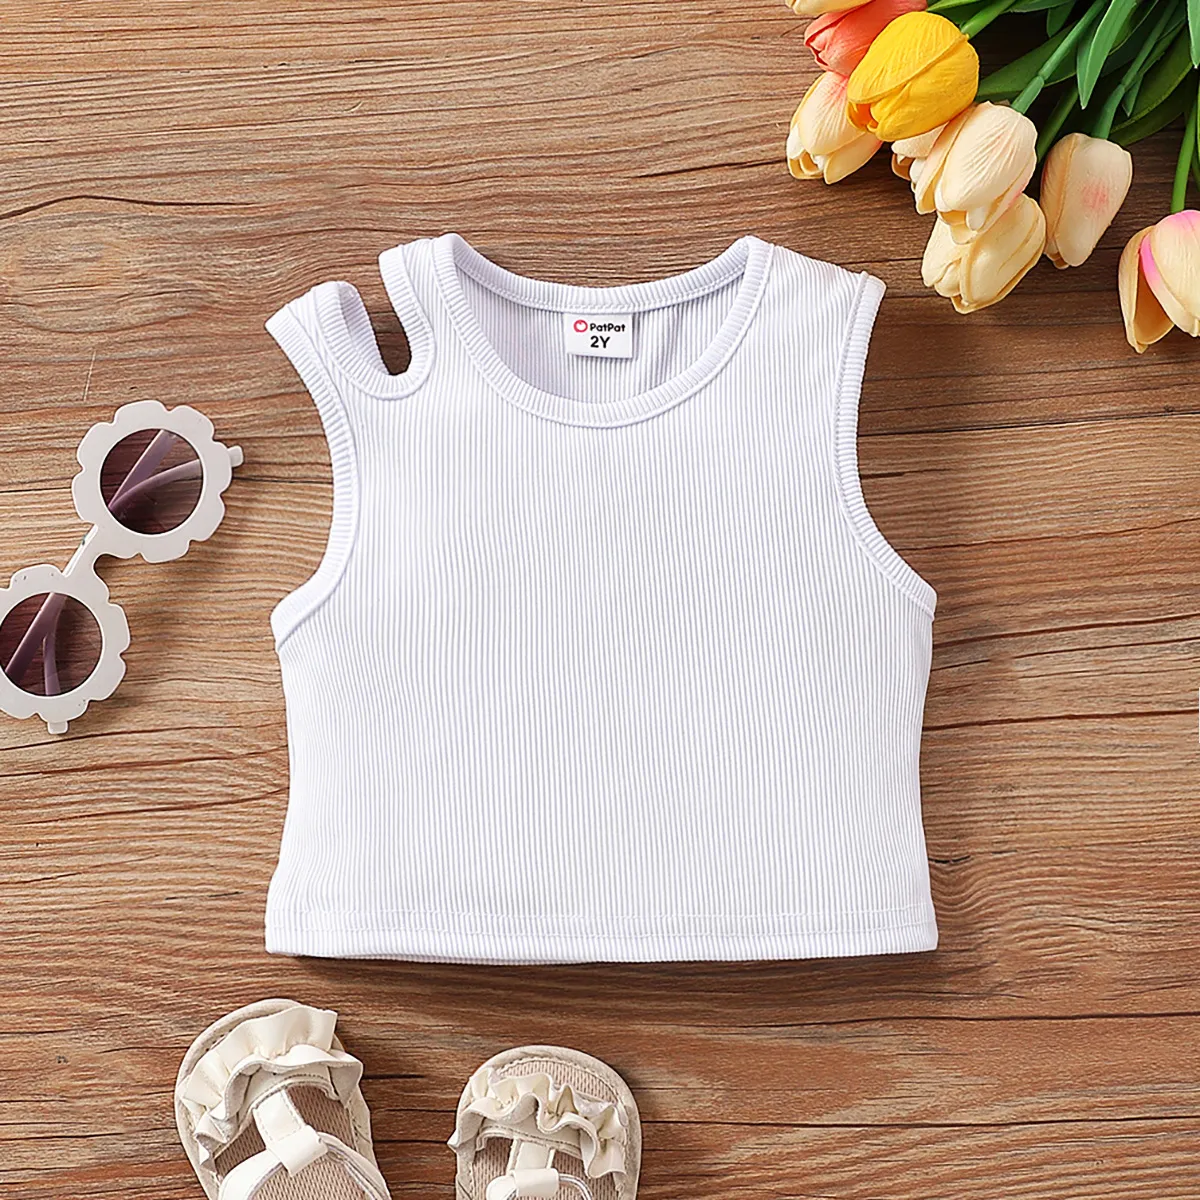 Toddler Girl's Casual Solid Camisole Top White big image 1